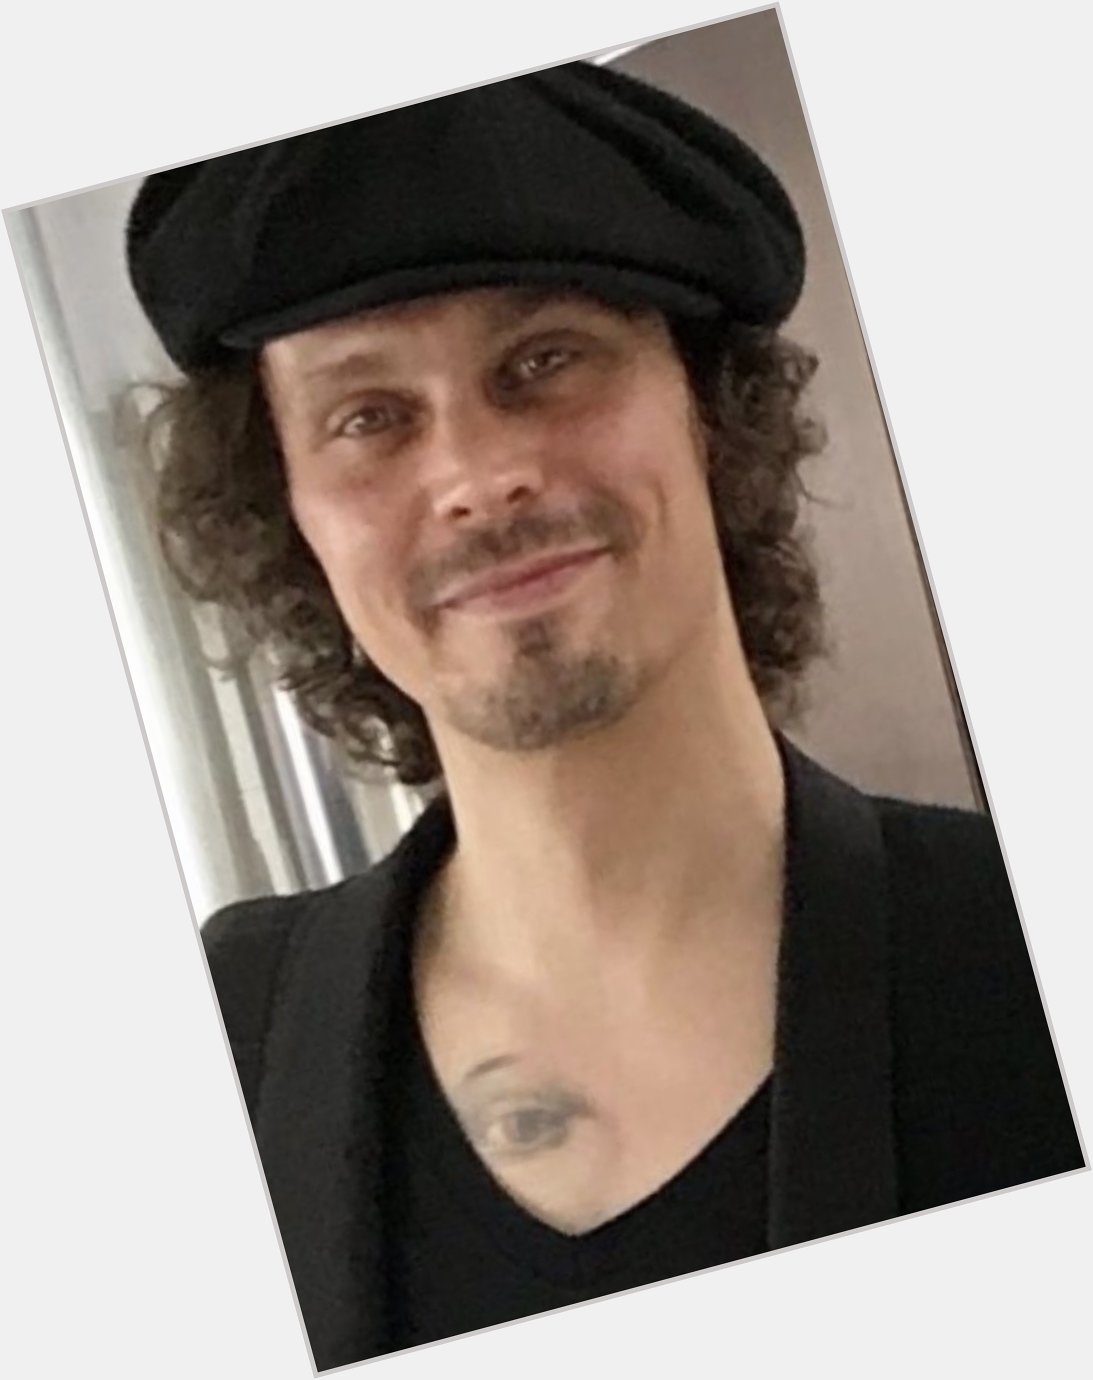 Happy Birthday Ville Valo!! One of the greatest voices in rock and roll ever!! 